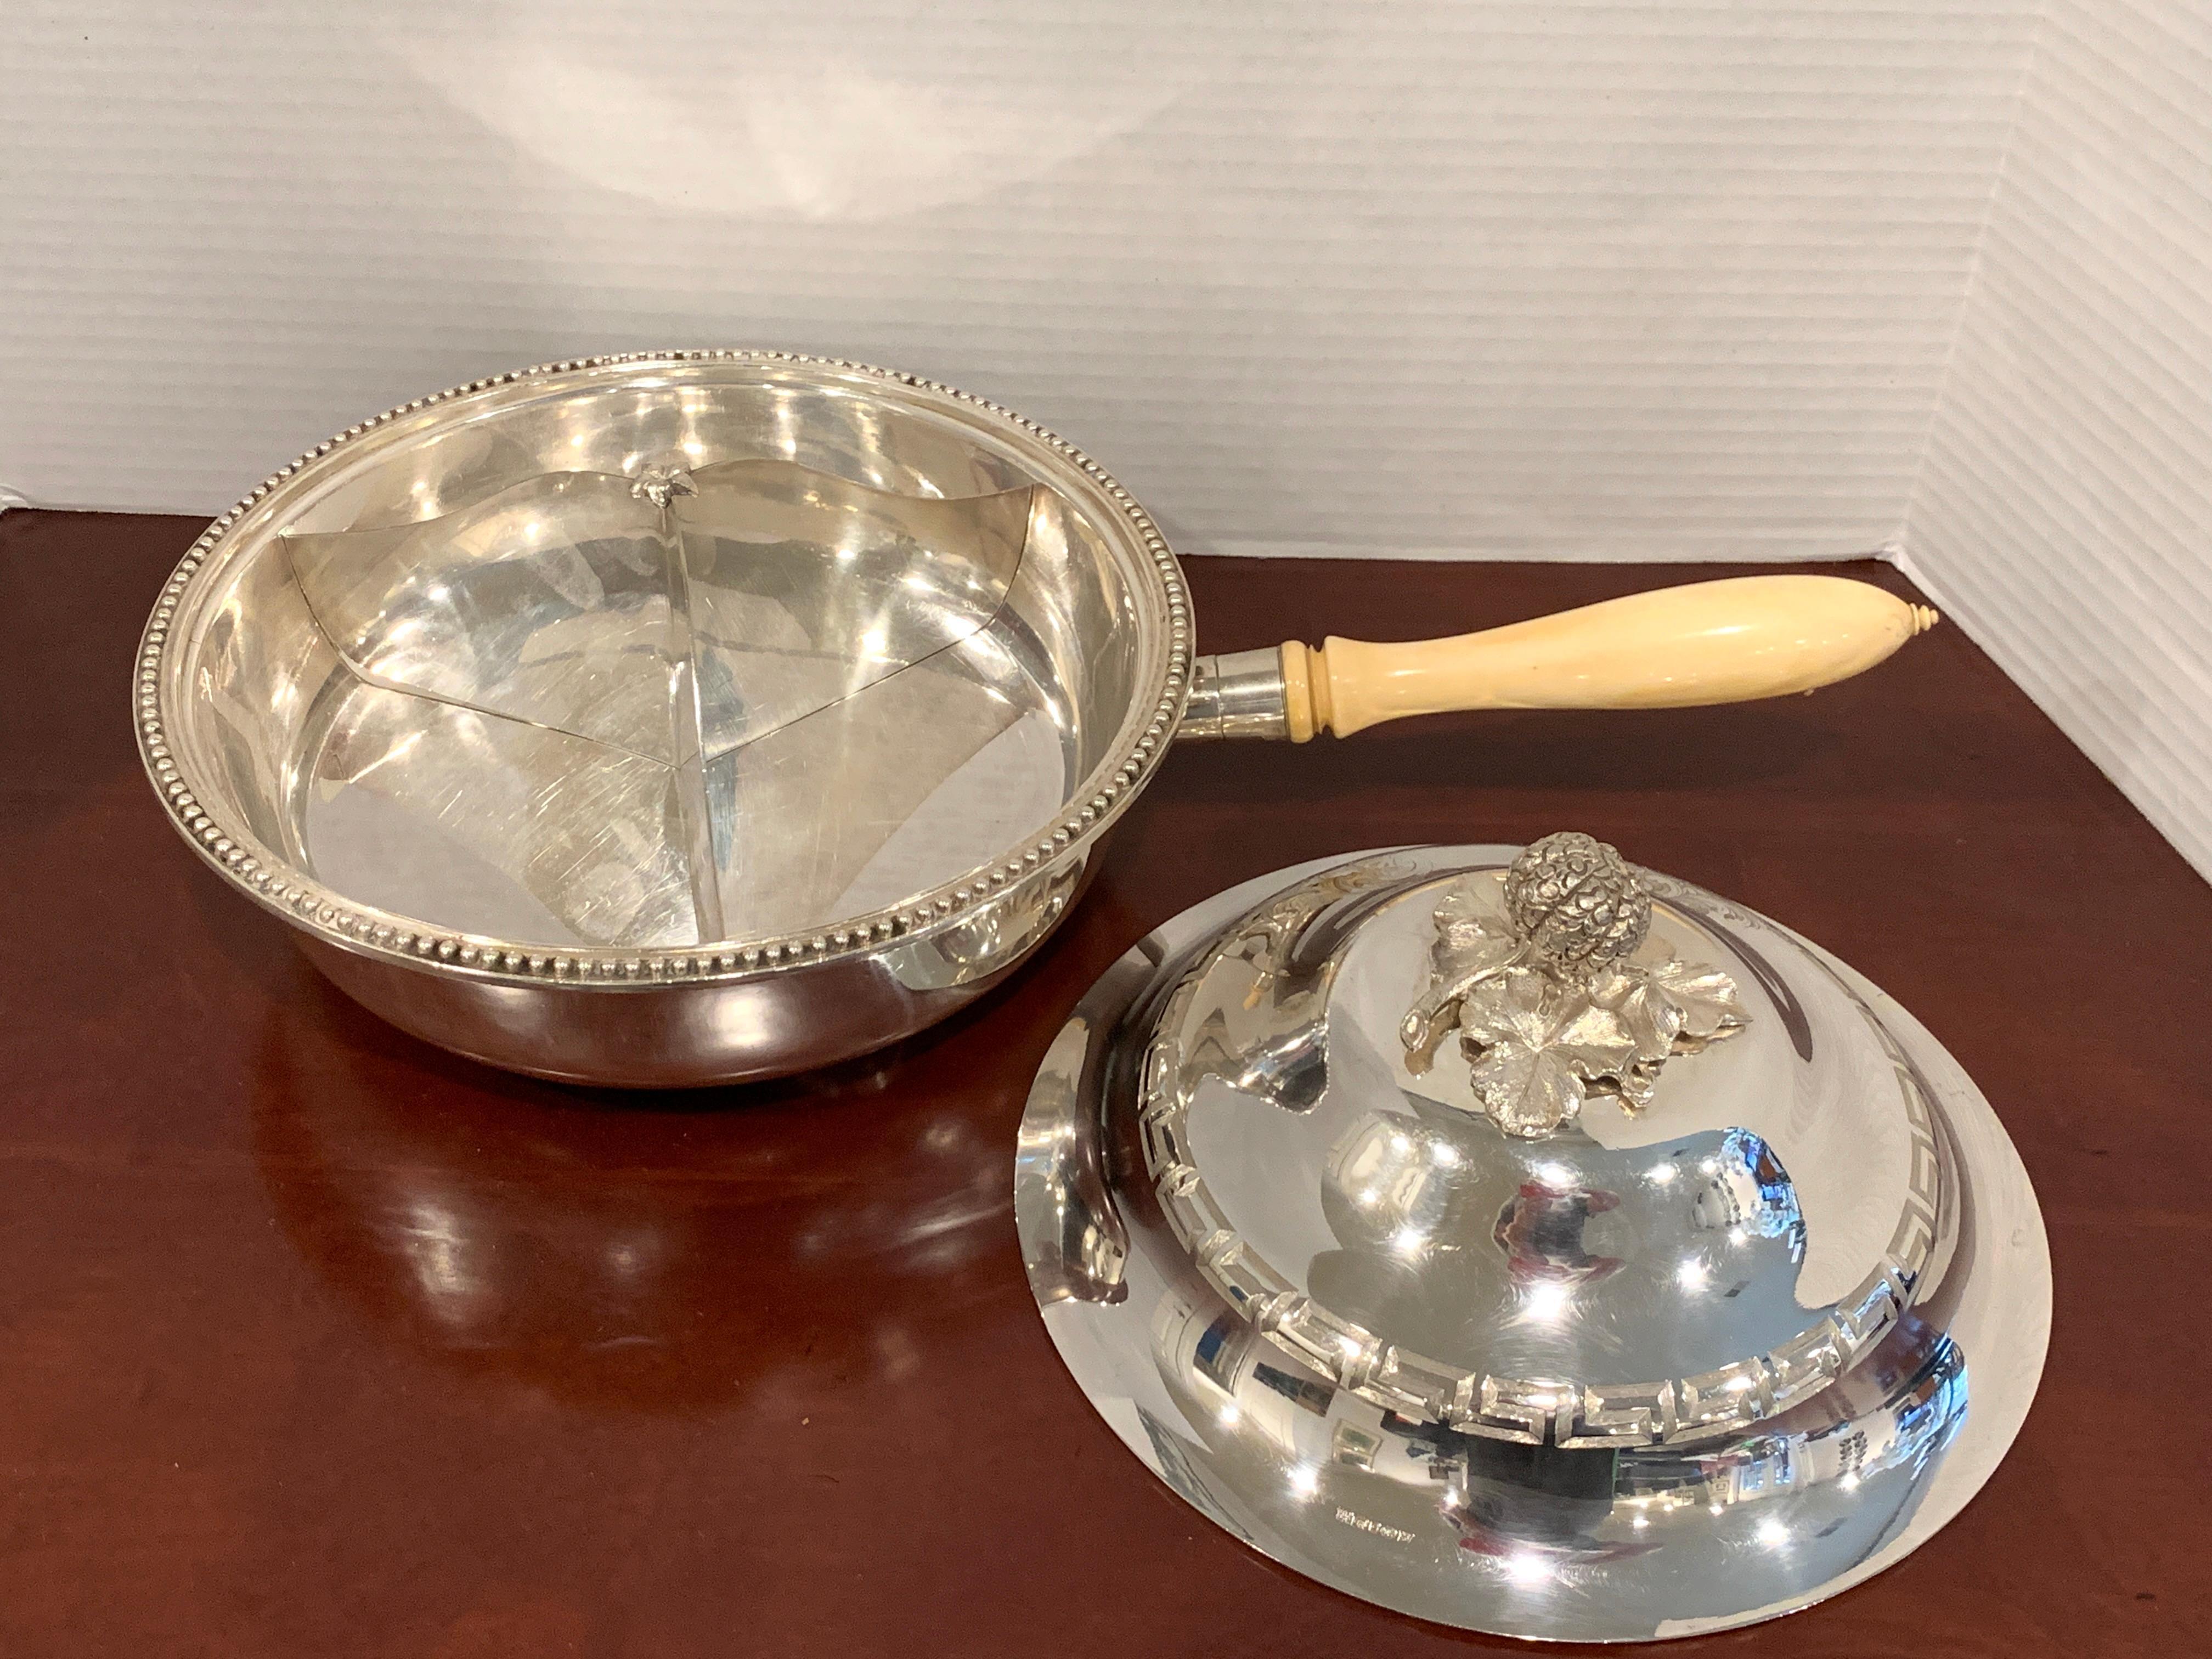 19th Century Antique English Silver Plated Warming Supper Dish by Henry Wilkinson & Co. For Sale